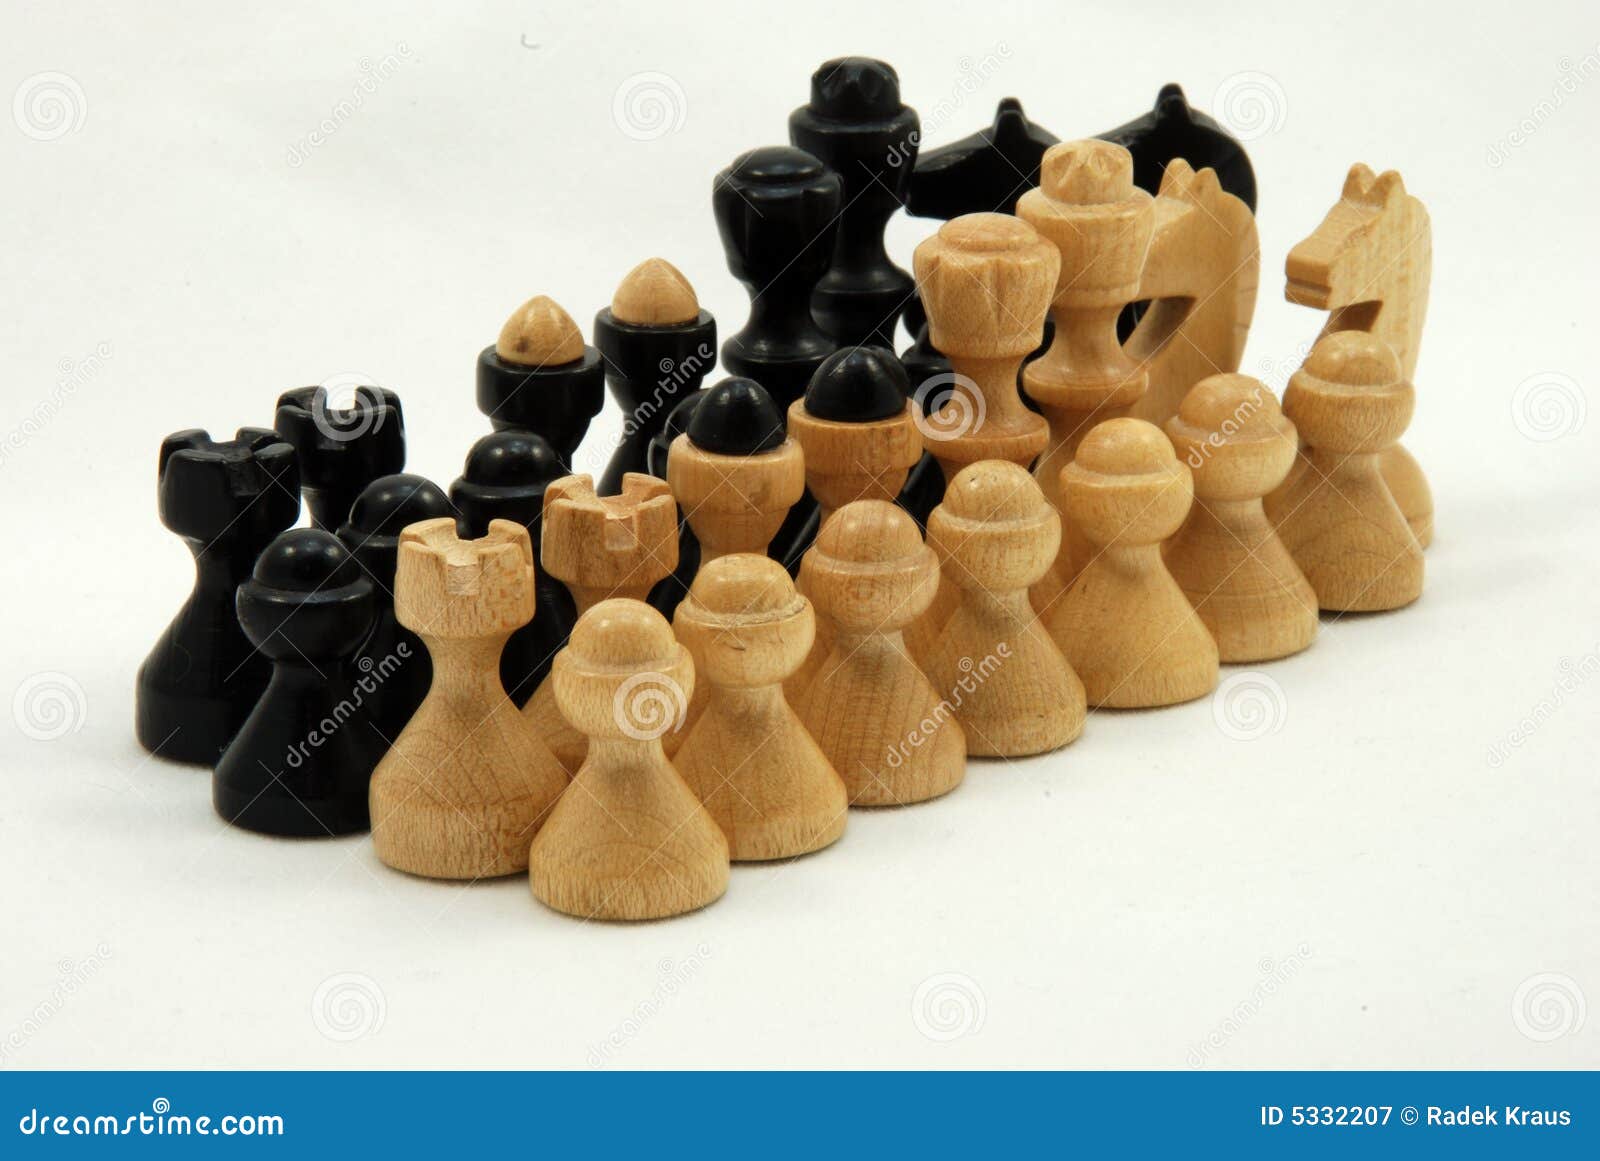 23+ Thousand Chessman Royalty-Free Images, Stock Photos & Pictures